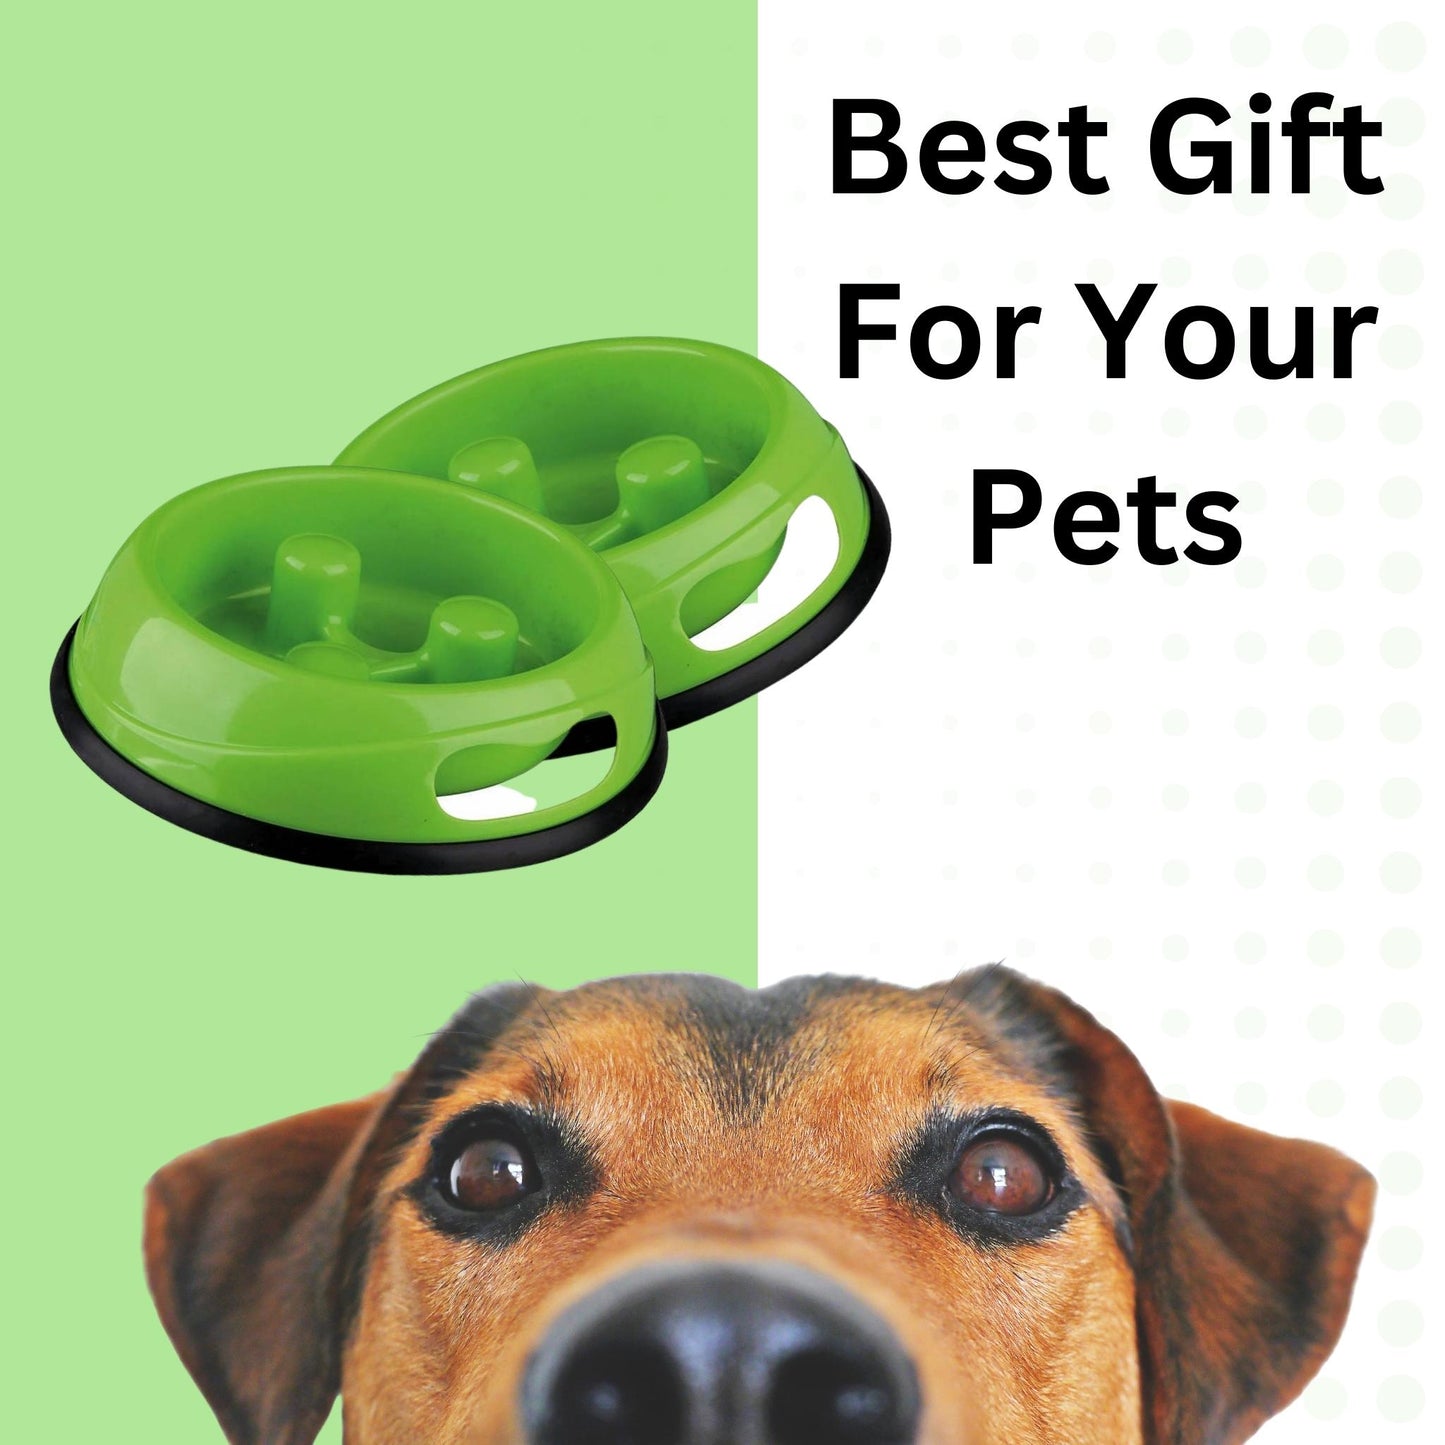 Foodie Puppies Pet Bowl Slow Feeder for Dogs & Cats - 900ml, Green